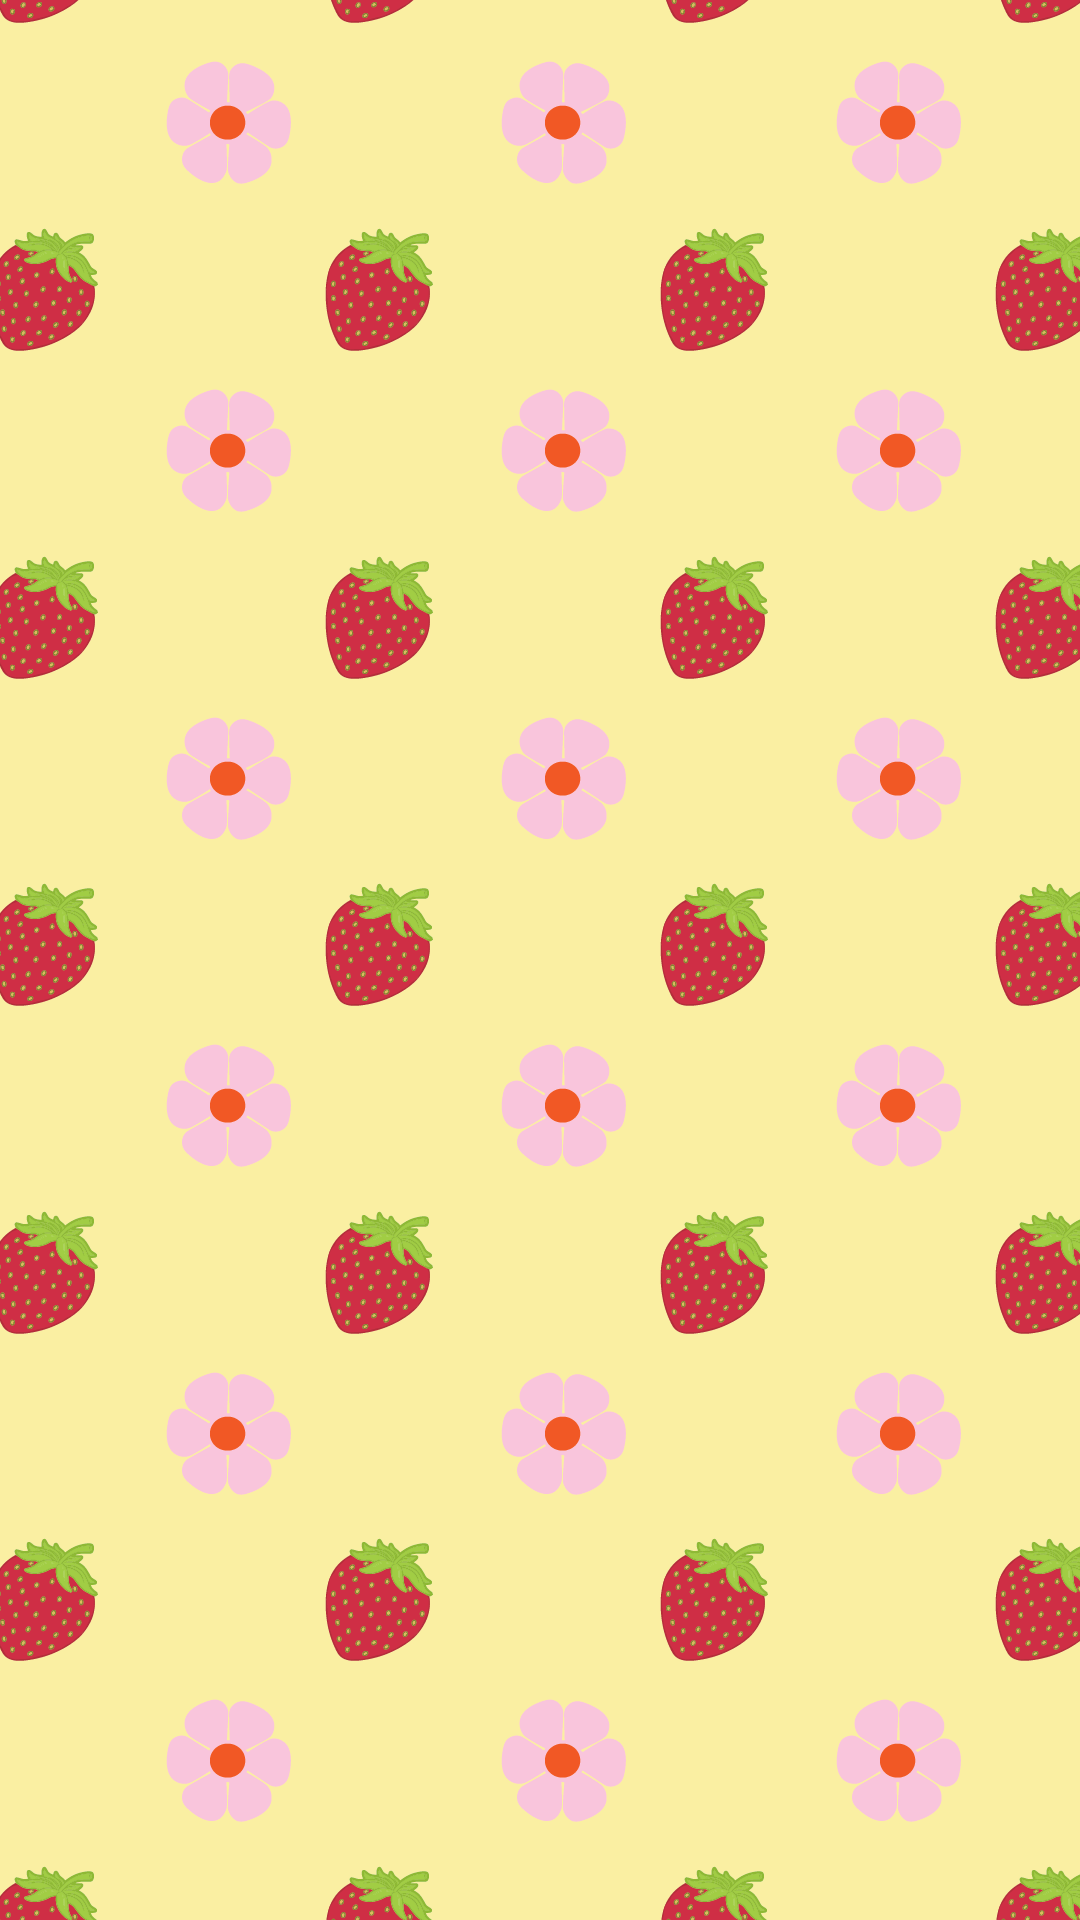 A yellow wallpaper with strawberries and pink flowers - Strawberry